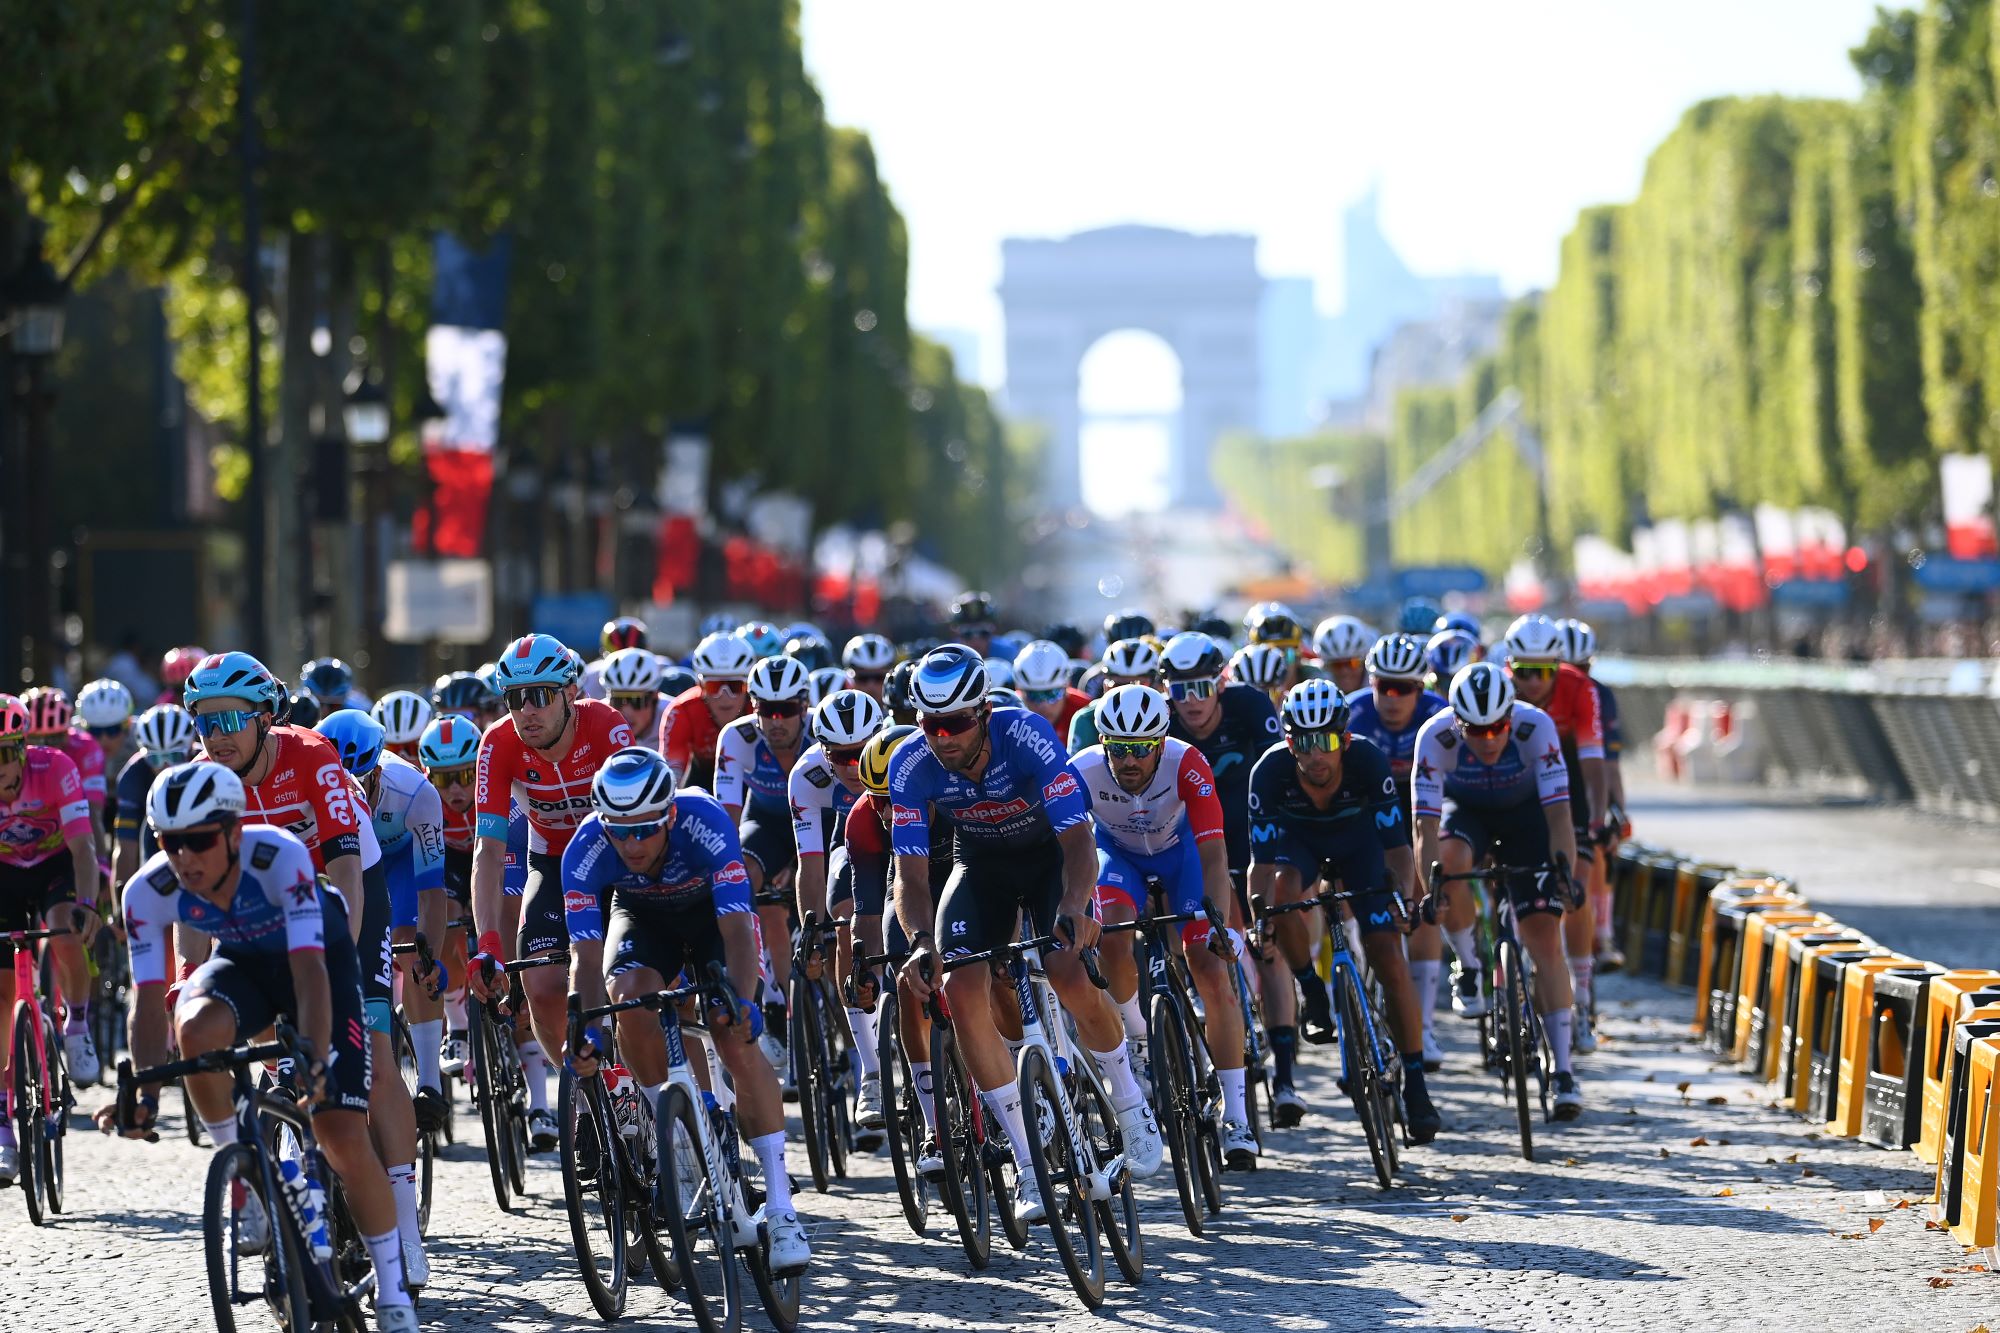 First glimpse at Netflix's Tour de France documentary shown in teaser